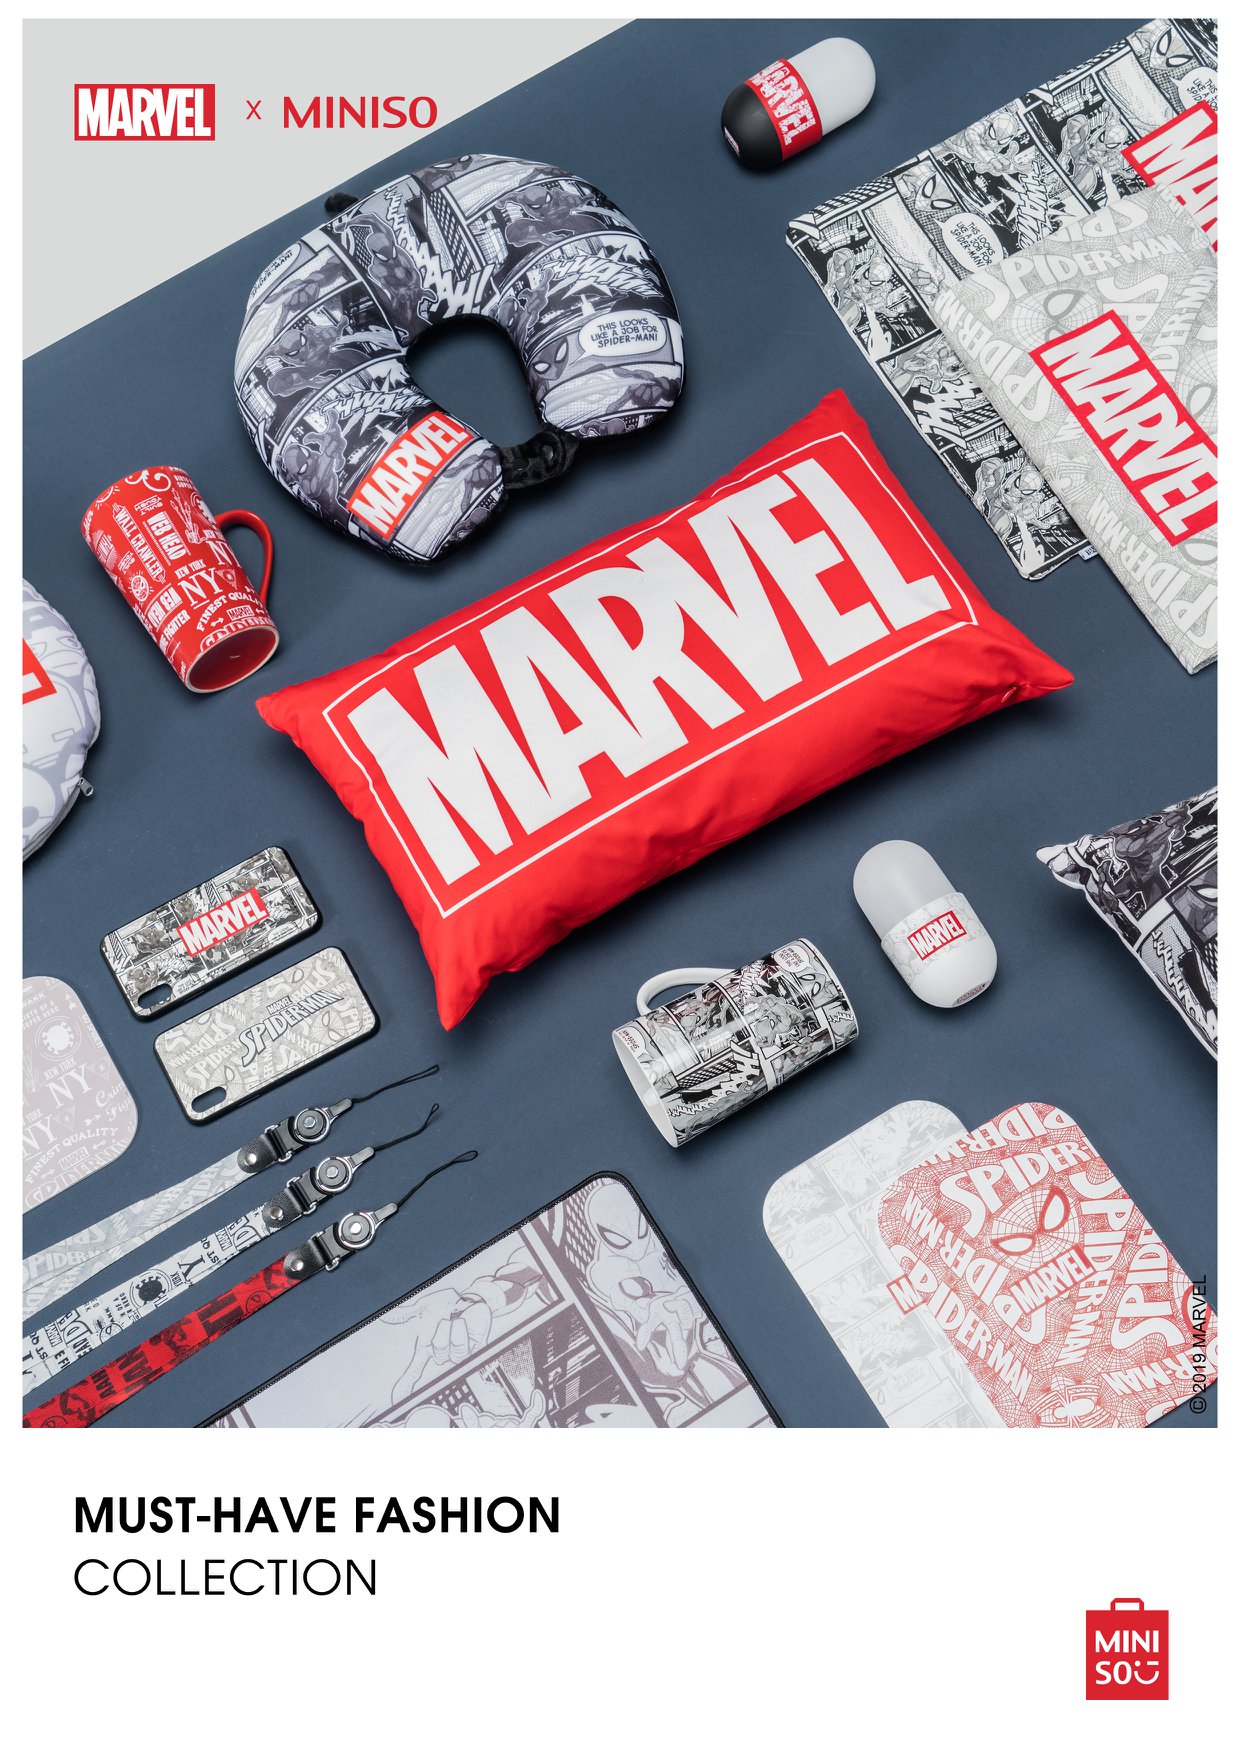 Miniso x Marvel merchandise to be launched in Singapore on 5 July 2019 - 4